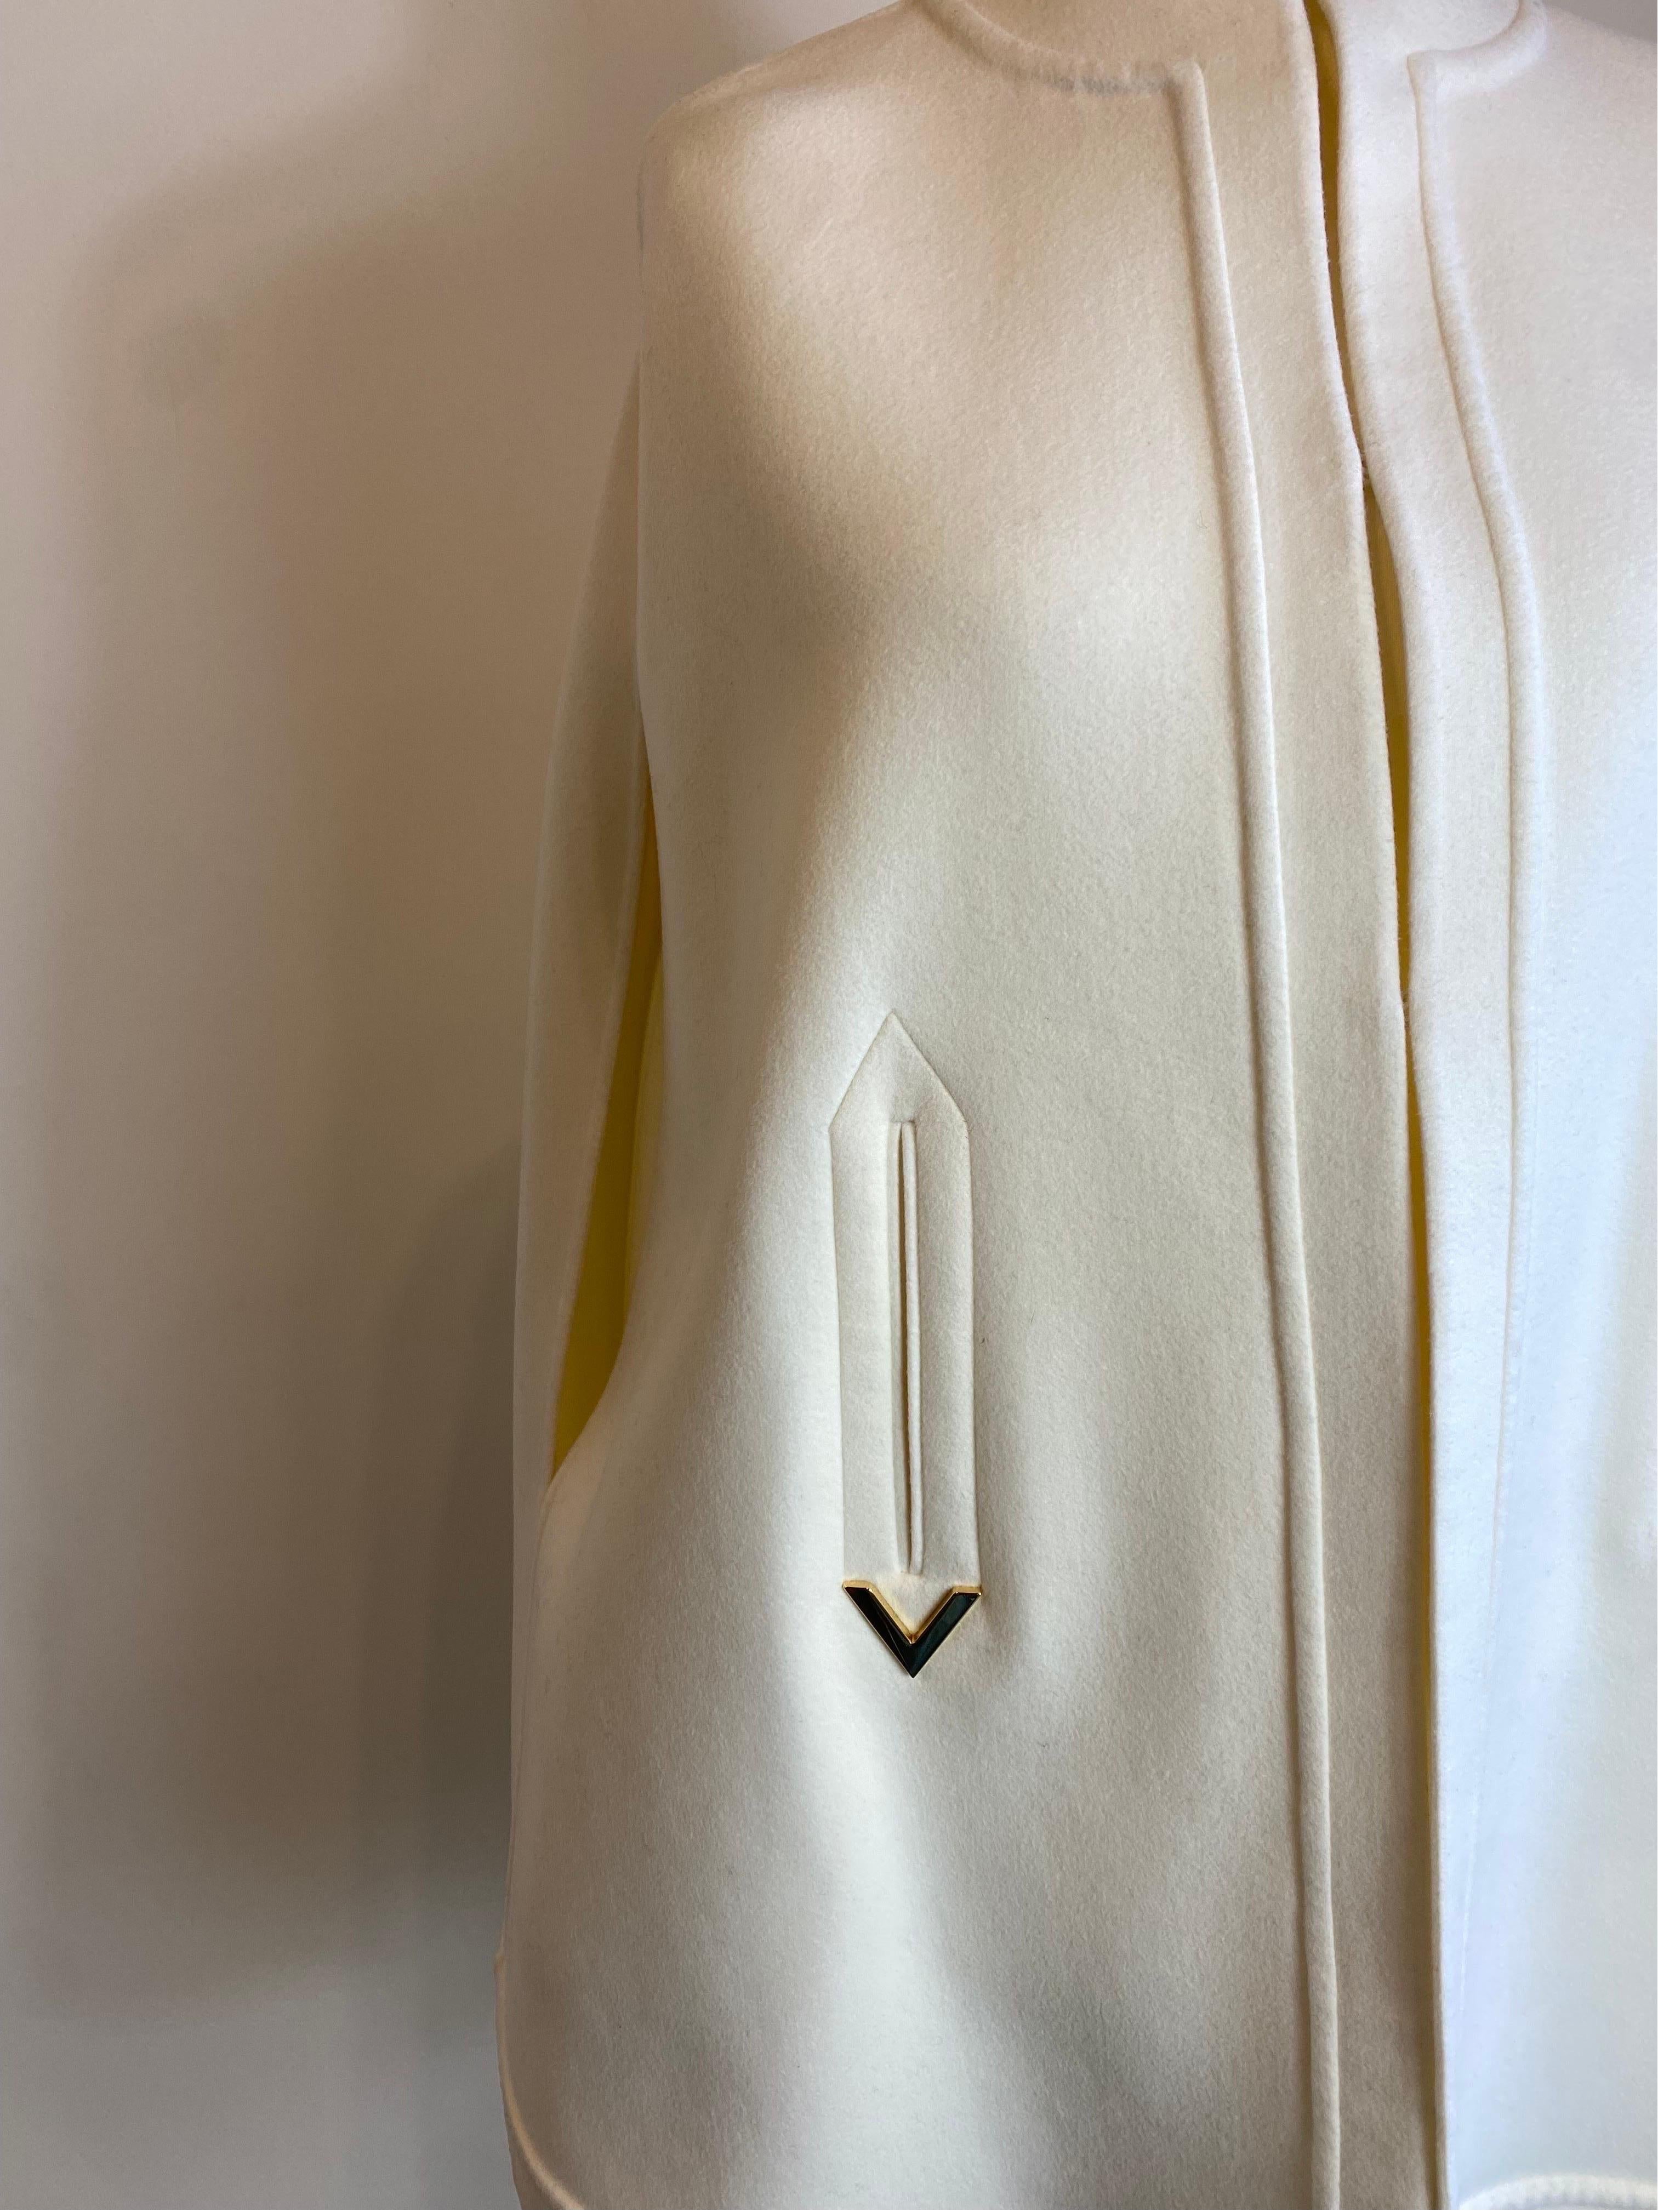 Valentino Virgin wool & cashmere White Cape In Excellent Condition For Sale In Carnate, IT